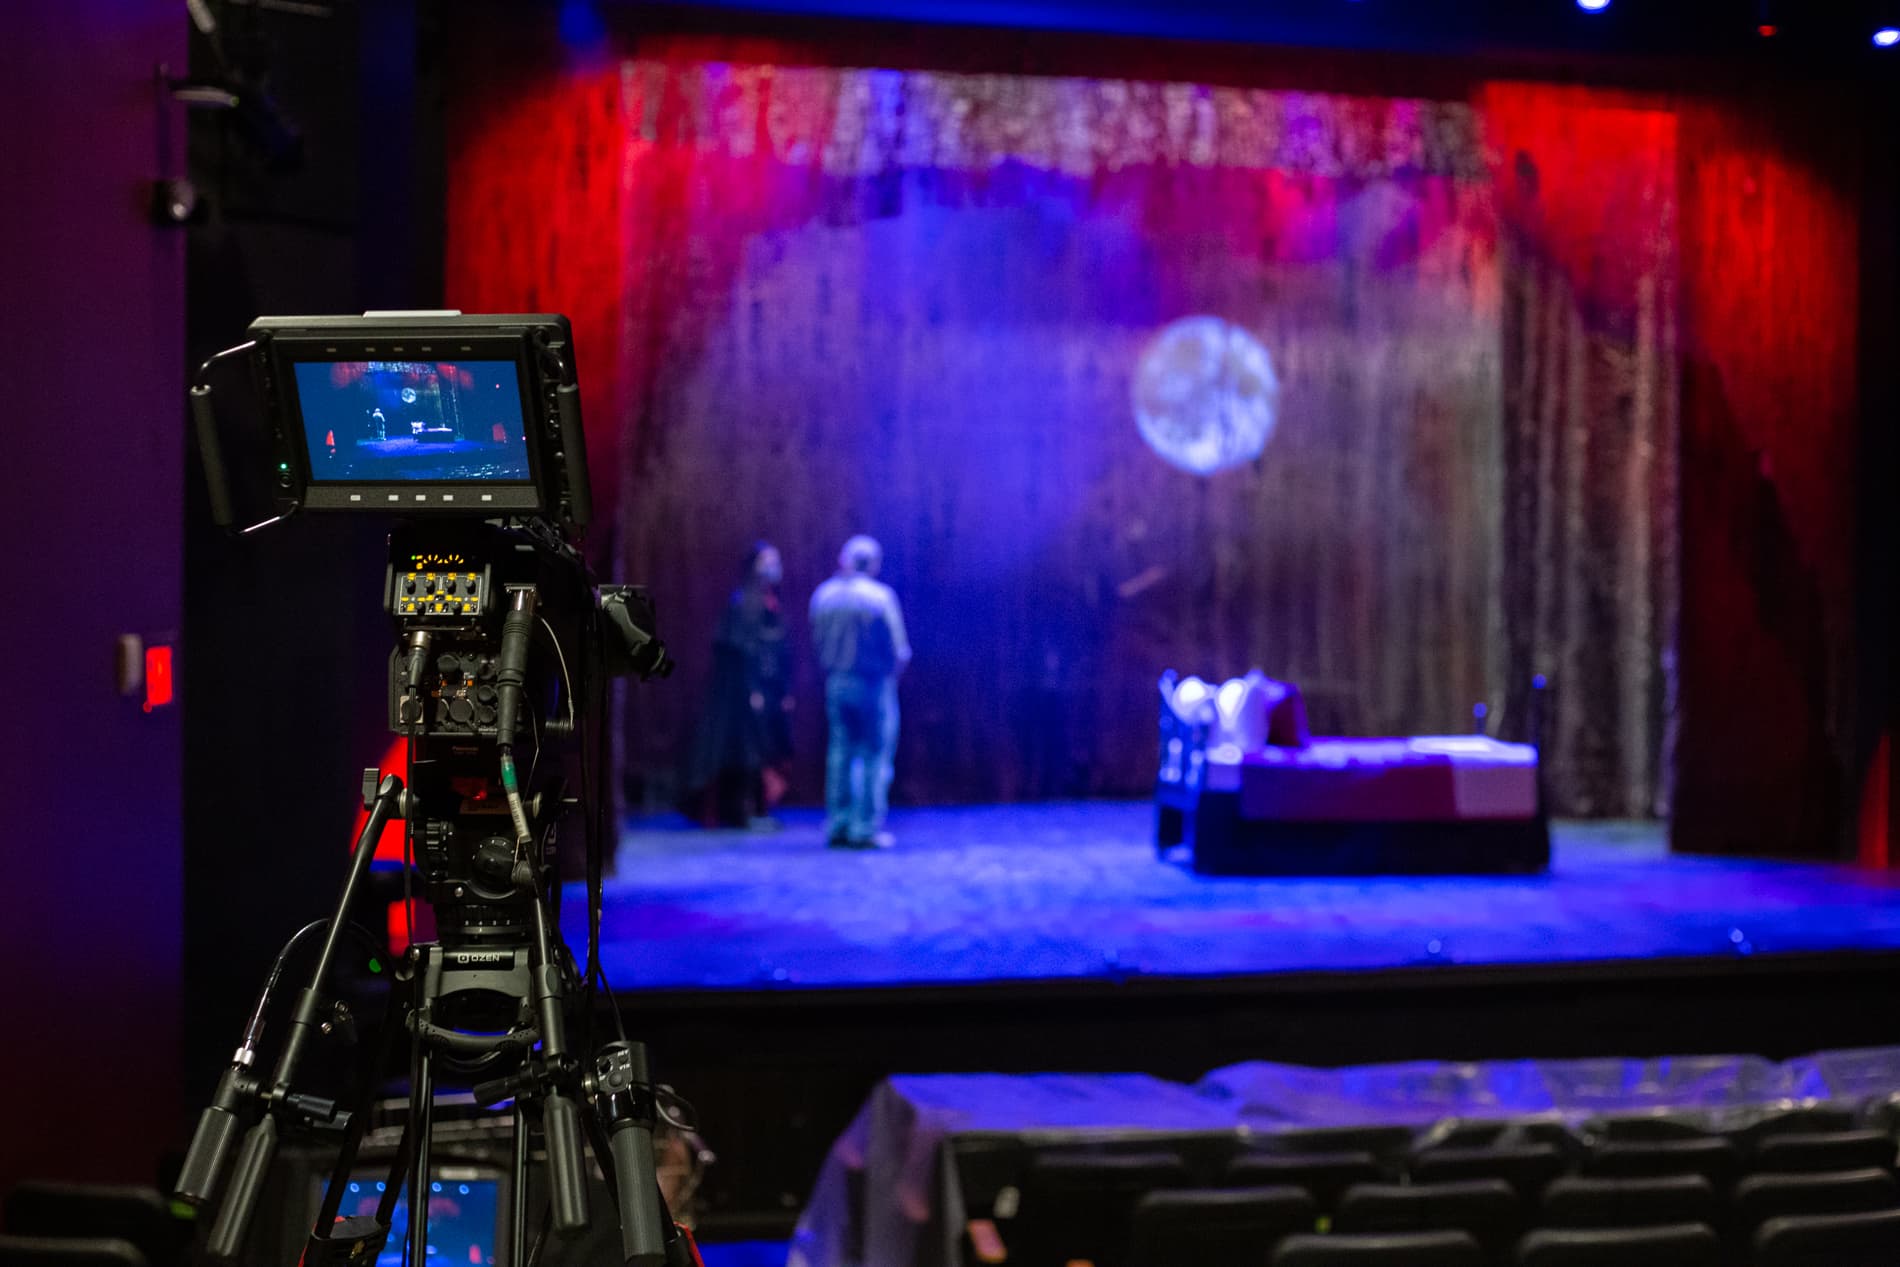 Camera on a tripod pointed at a stage with students on it